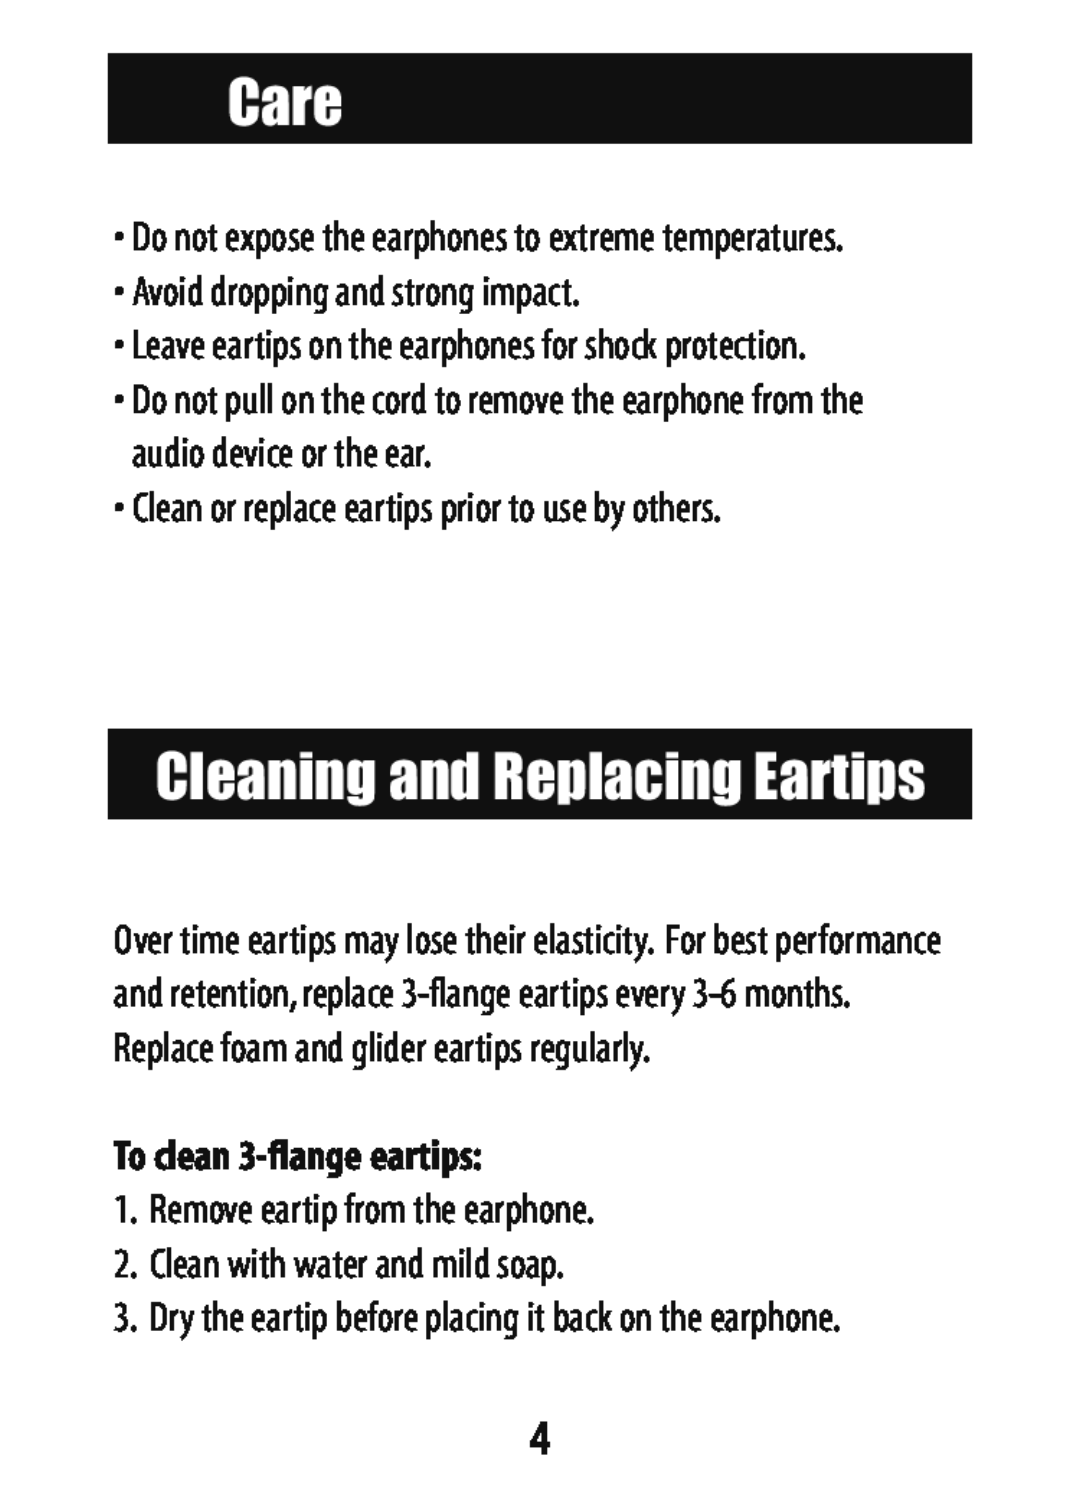 Etymotic Research HF5 user manual Care, Cleaning and Replacing Eartips, To clean 3-flangeeartips 